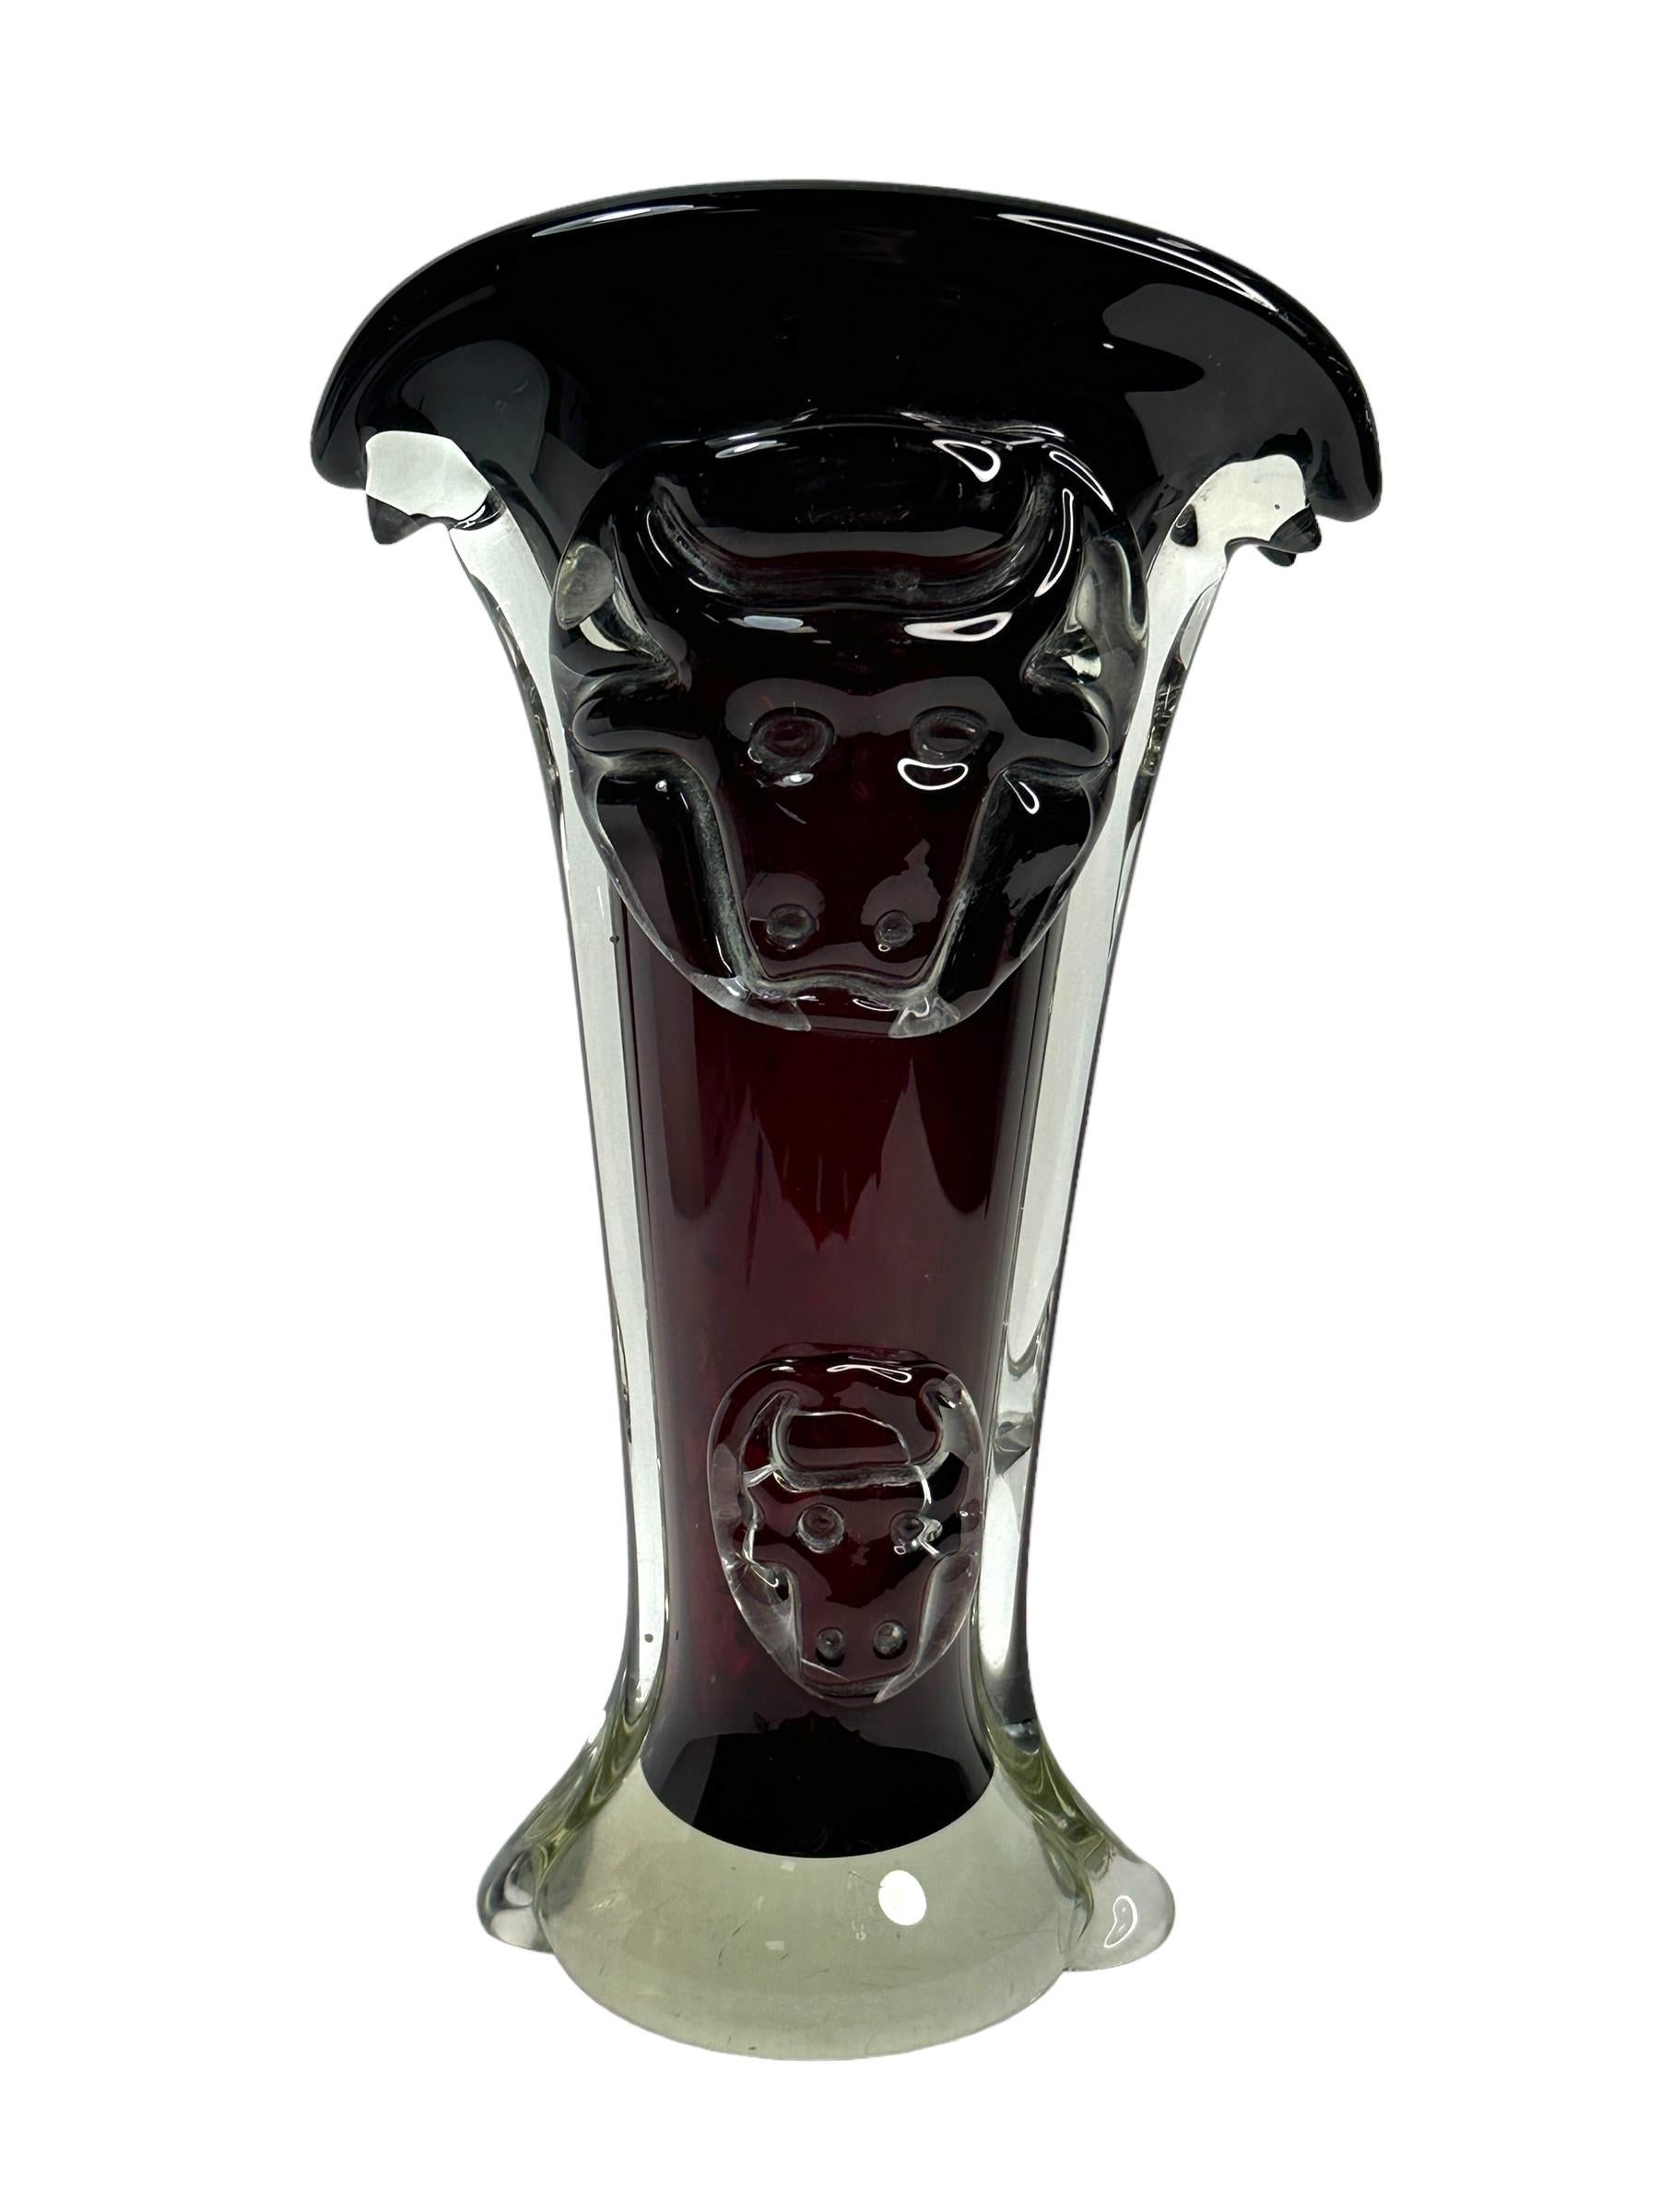 Gorgeous hand blown Murano art glass piece with Sommerso and bullicante techniques. A beautiful organic shaped vase or centre piece, Venice, Murano, Italy. Colors are dark red and clear. A nice addition to any room. Found at an Estate Sale in